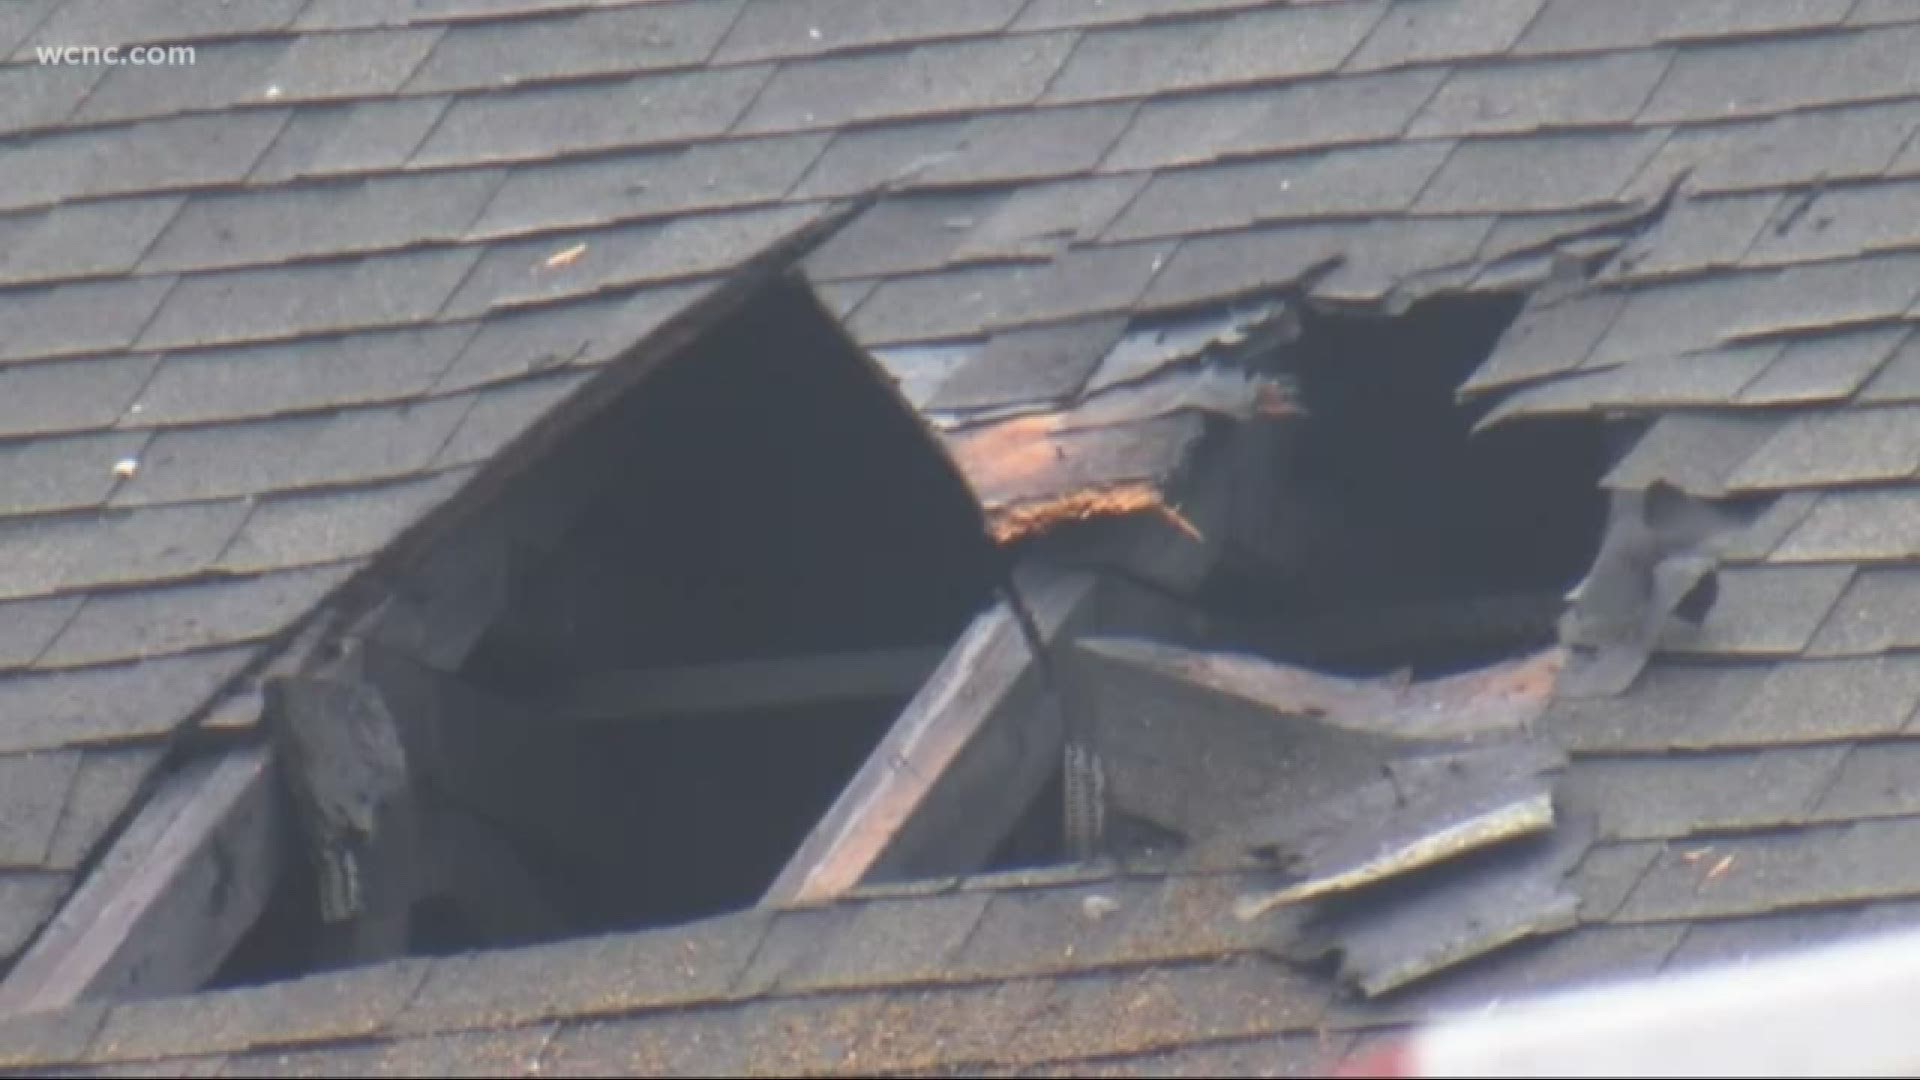 Firefighters said you can never be too careful if you think lightning has hit your home or property.